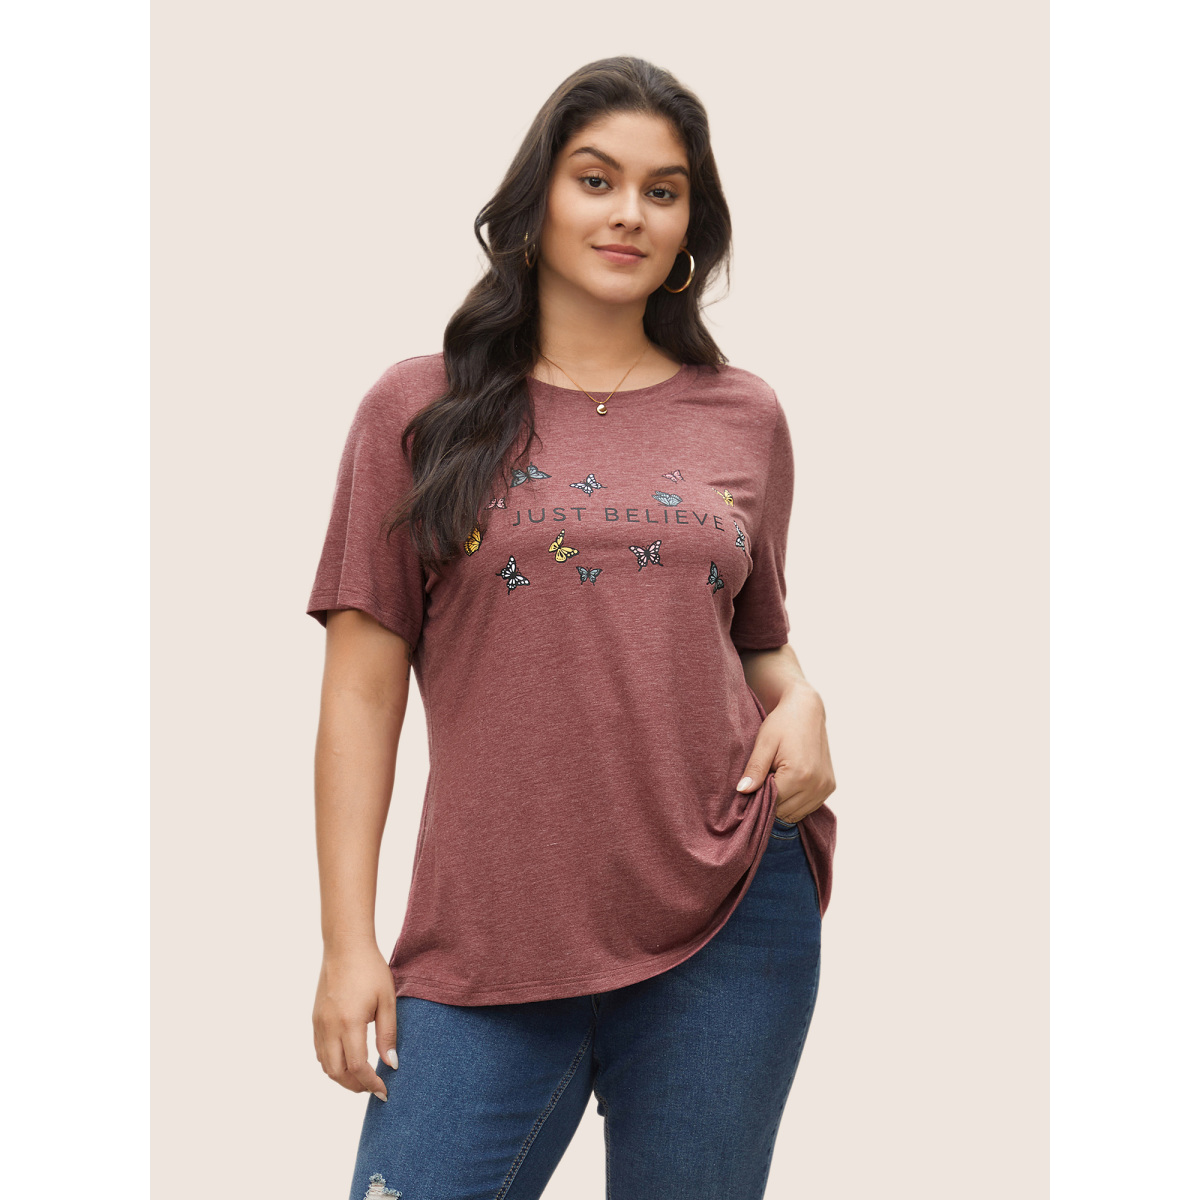 

Plus Size Butterfly & Positive Slogans Graphic Heather T-shirt Russet Women Casual Non Positive slogan Round Neck Everyday T-shirts BloomChic